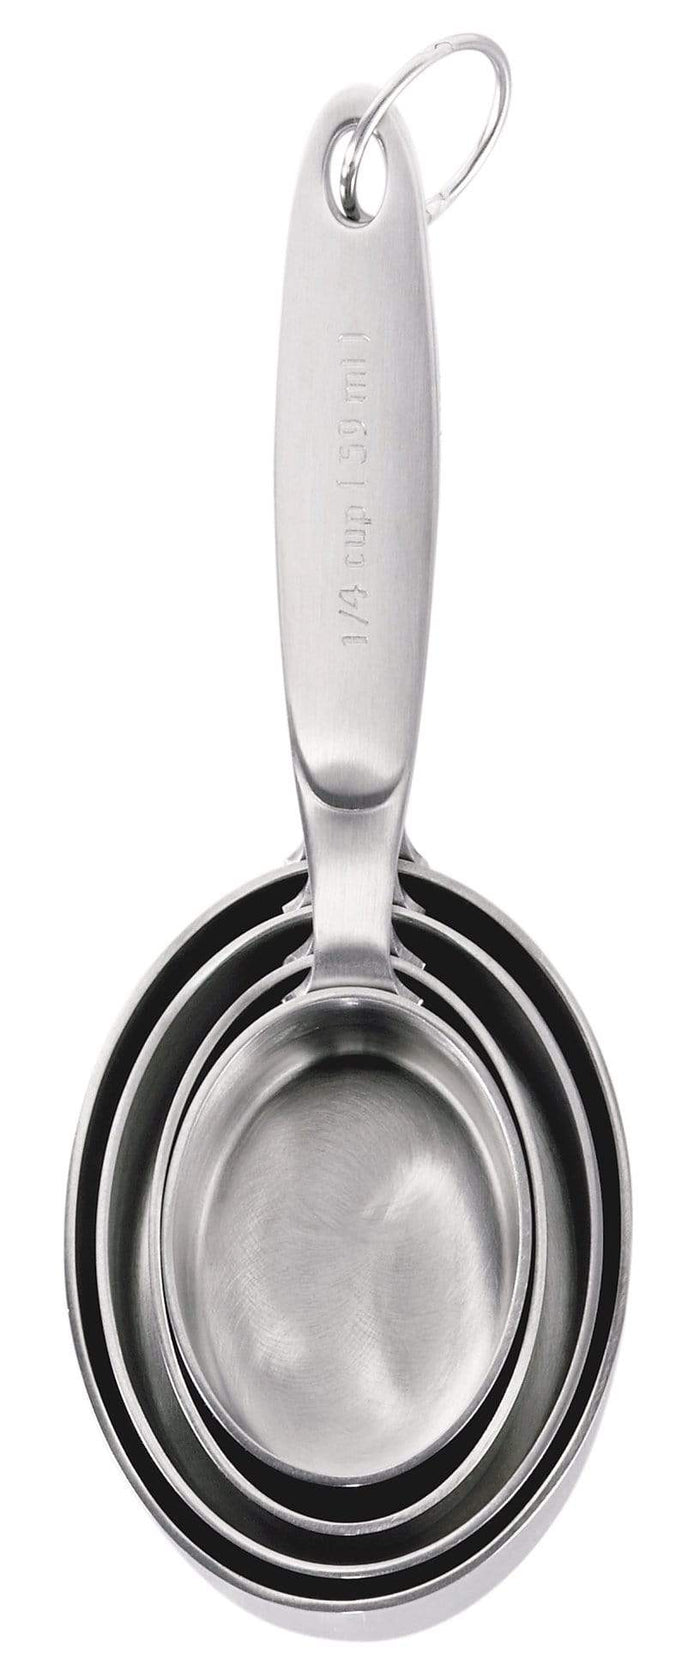 Le Creuset Stainless Steel Measuring Cups, Set of 4